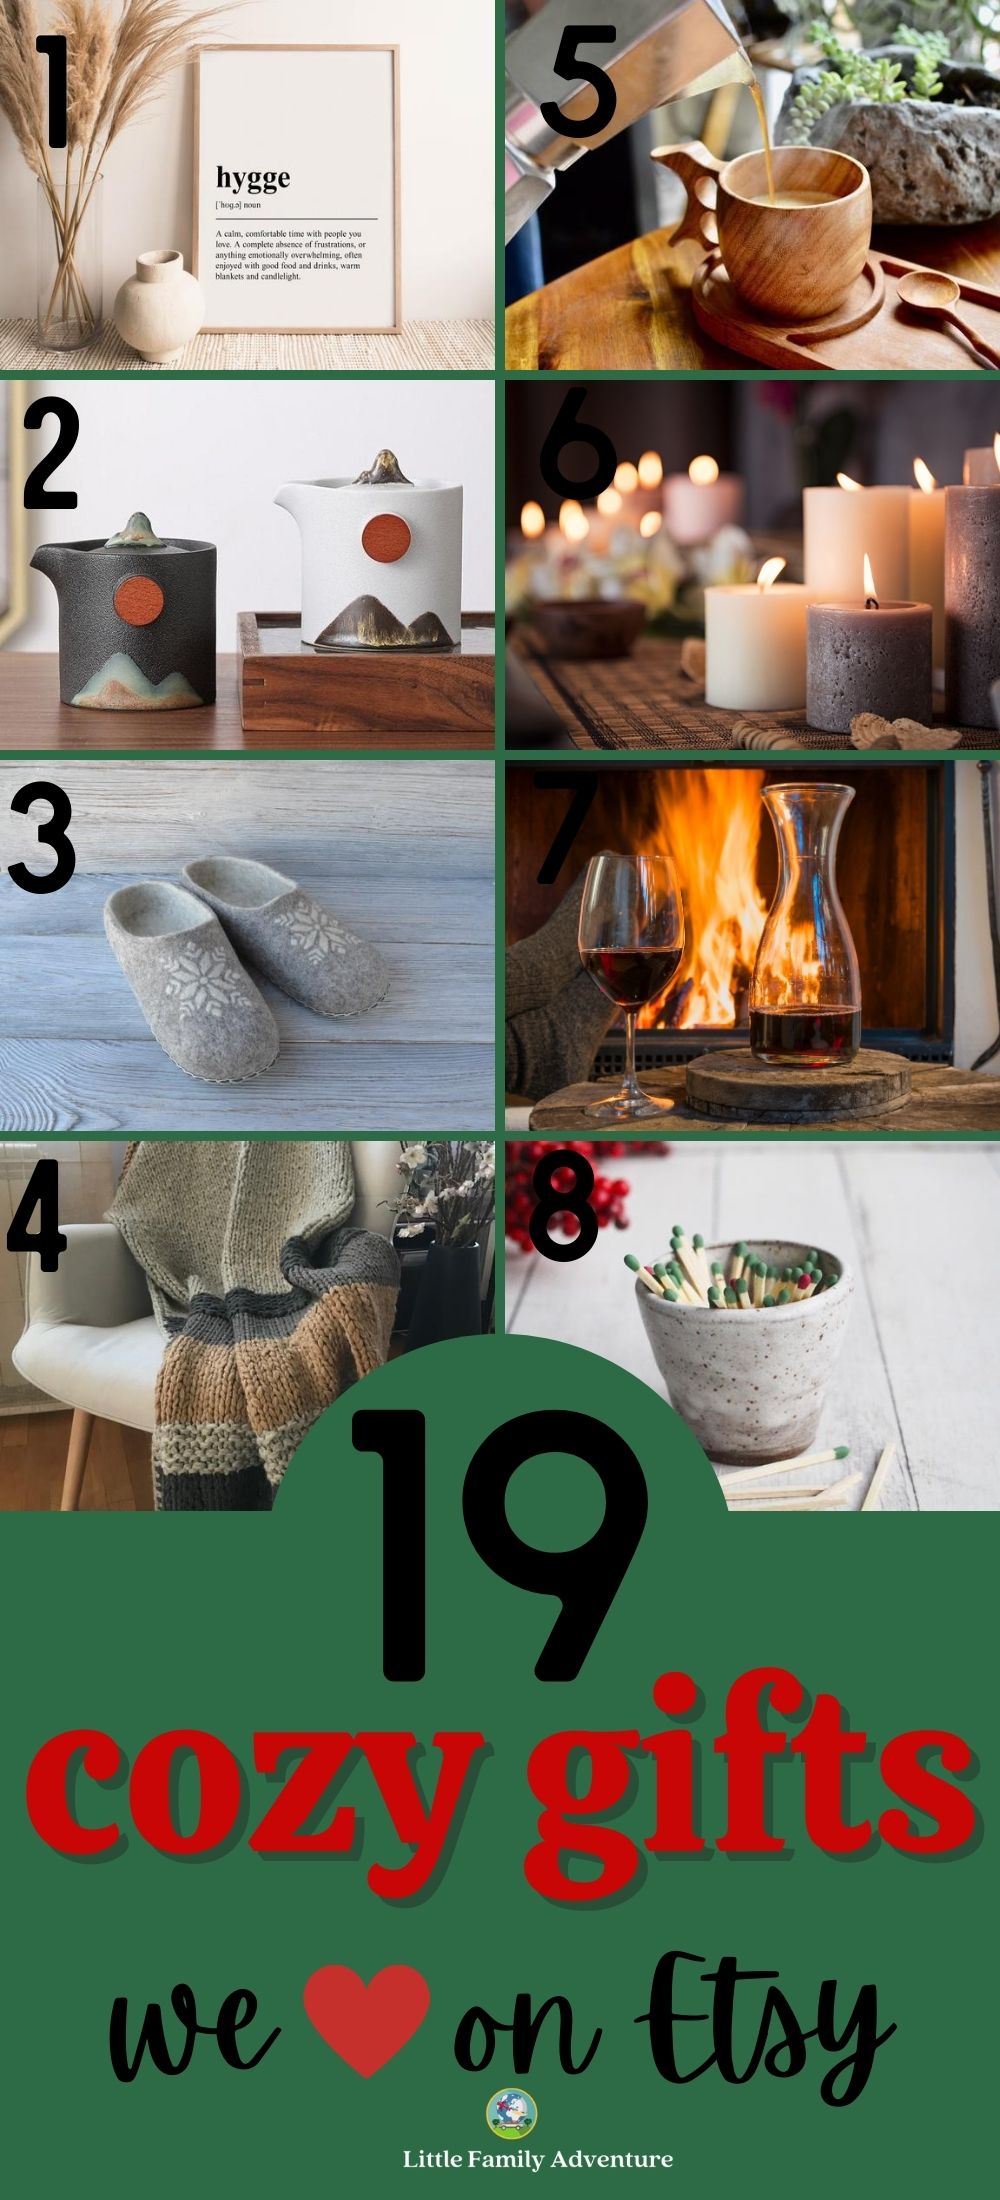 hygge gifts ideas with candle, decor, knit blankets, fire, and stoneware